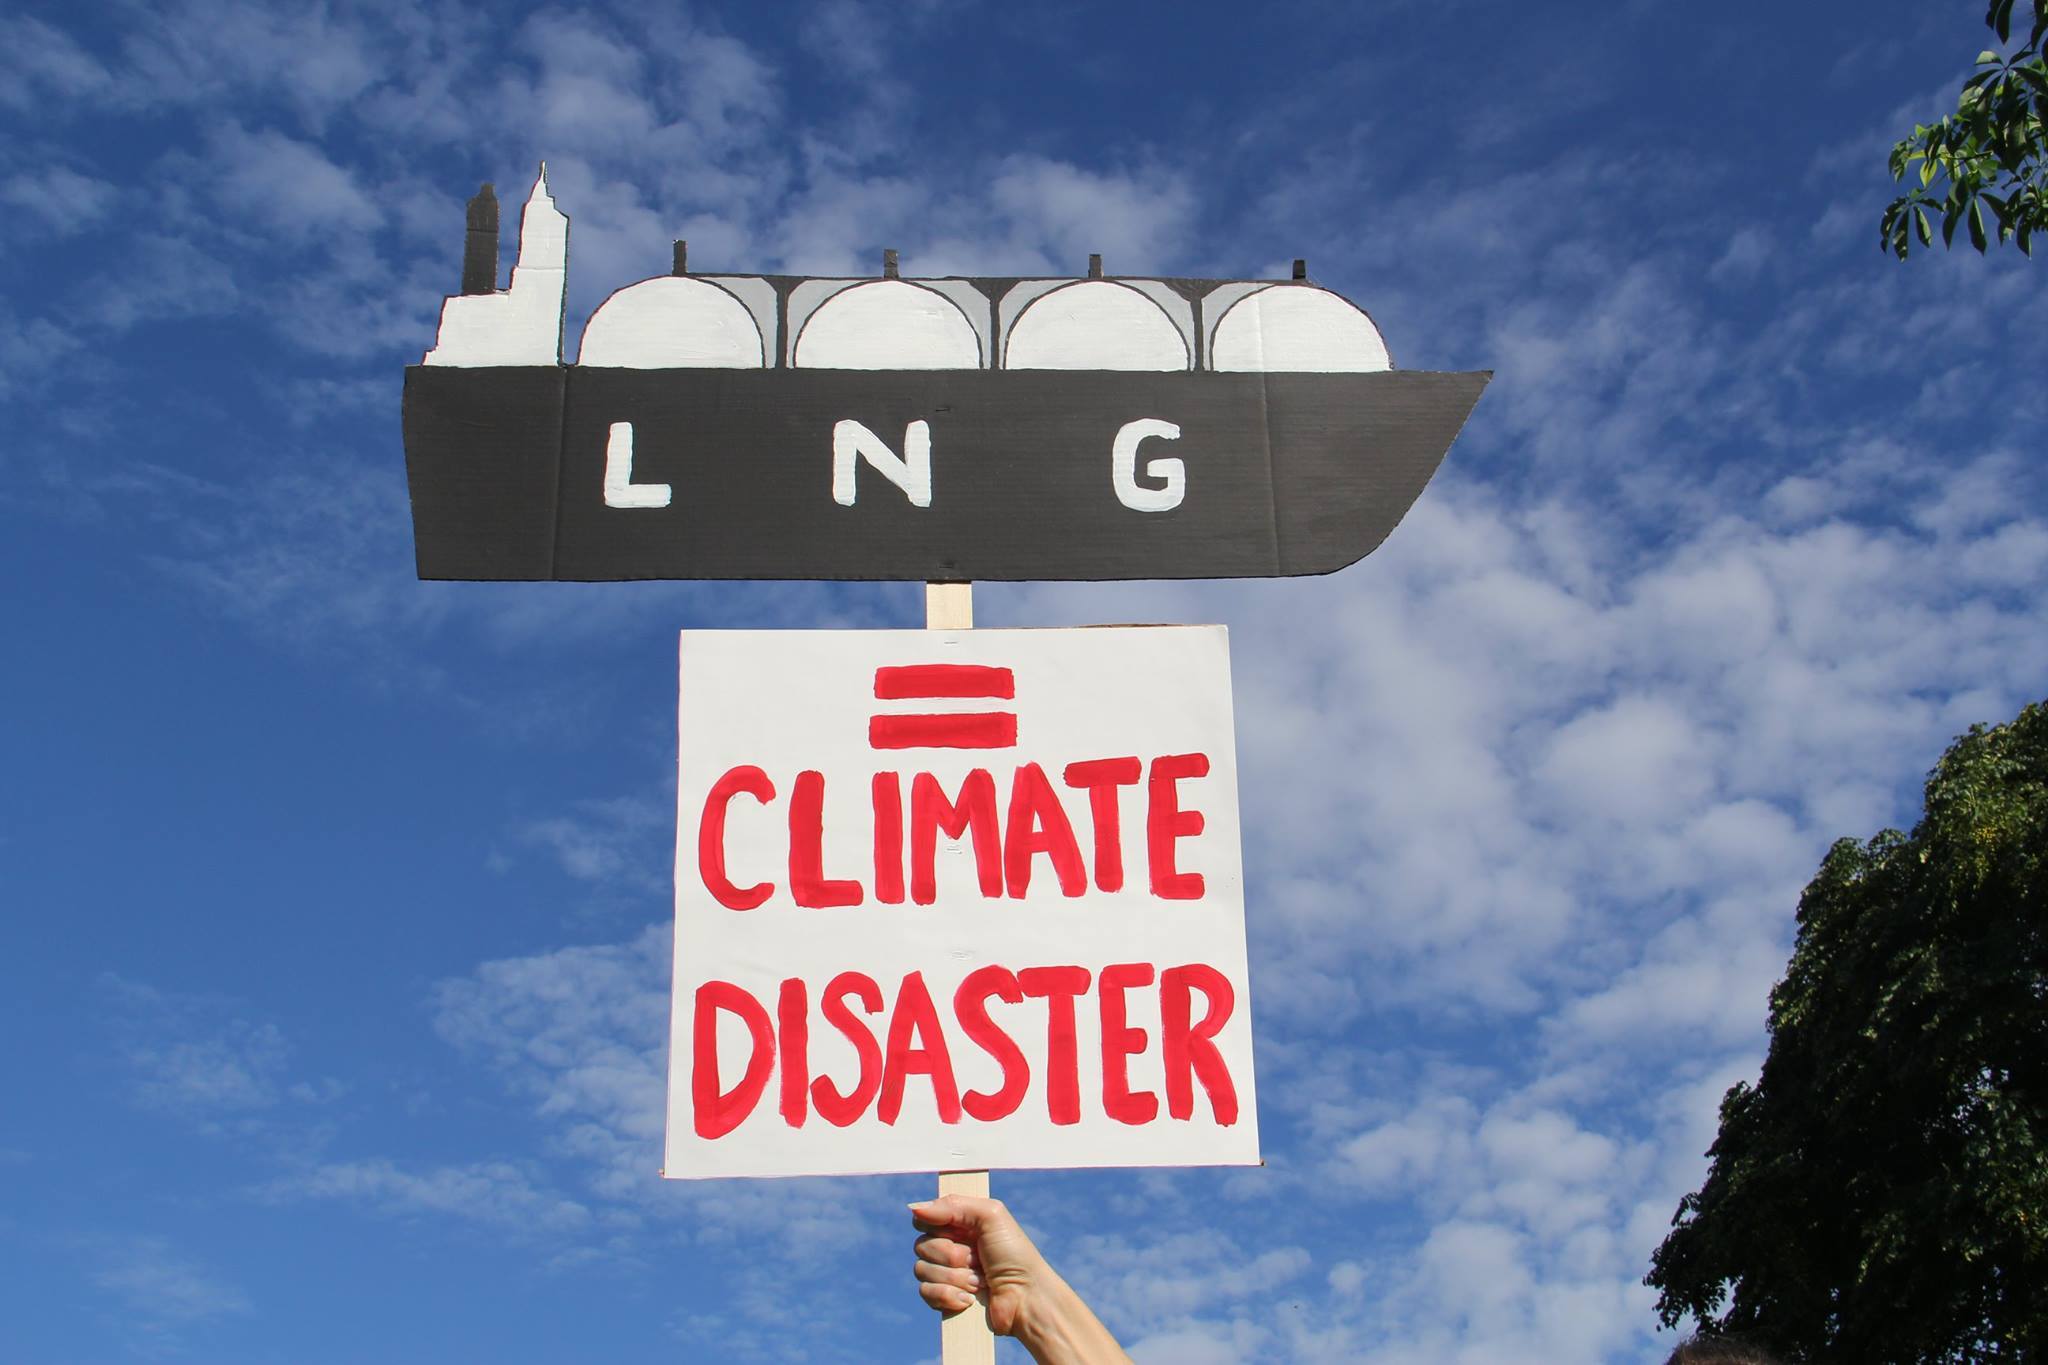 LNG equals climate disaster sign